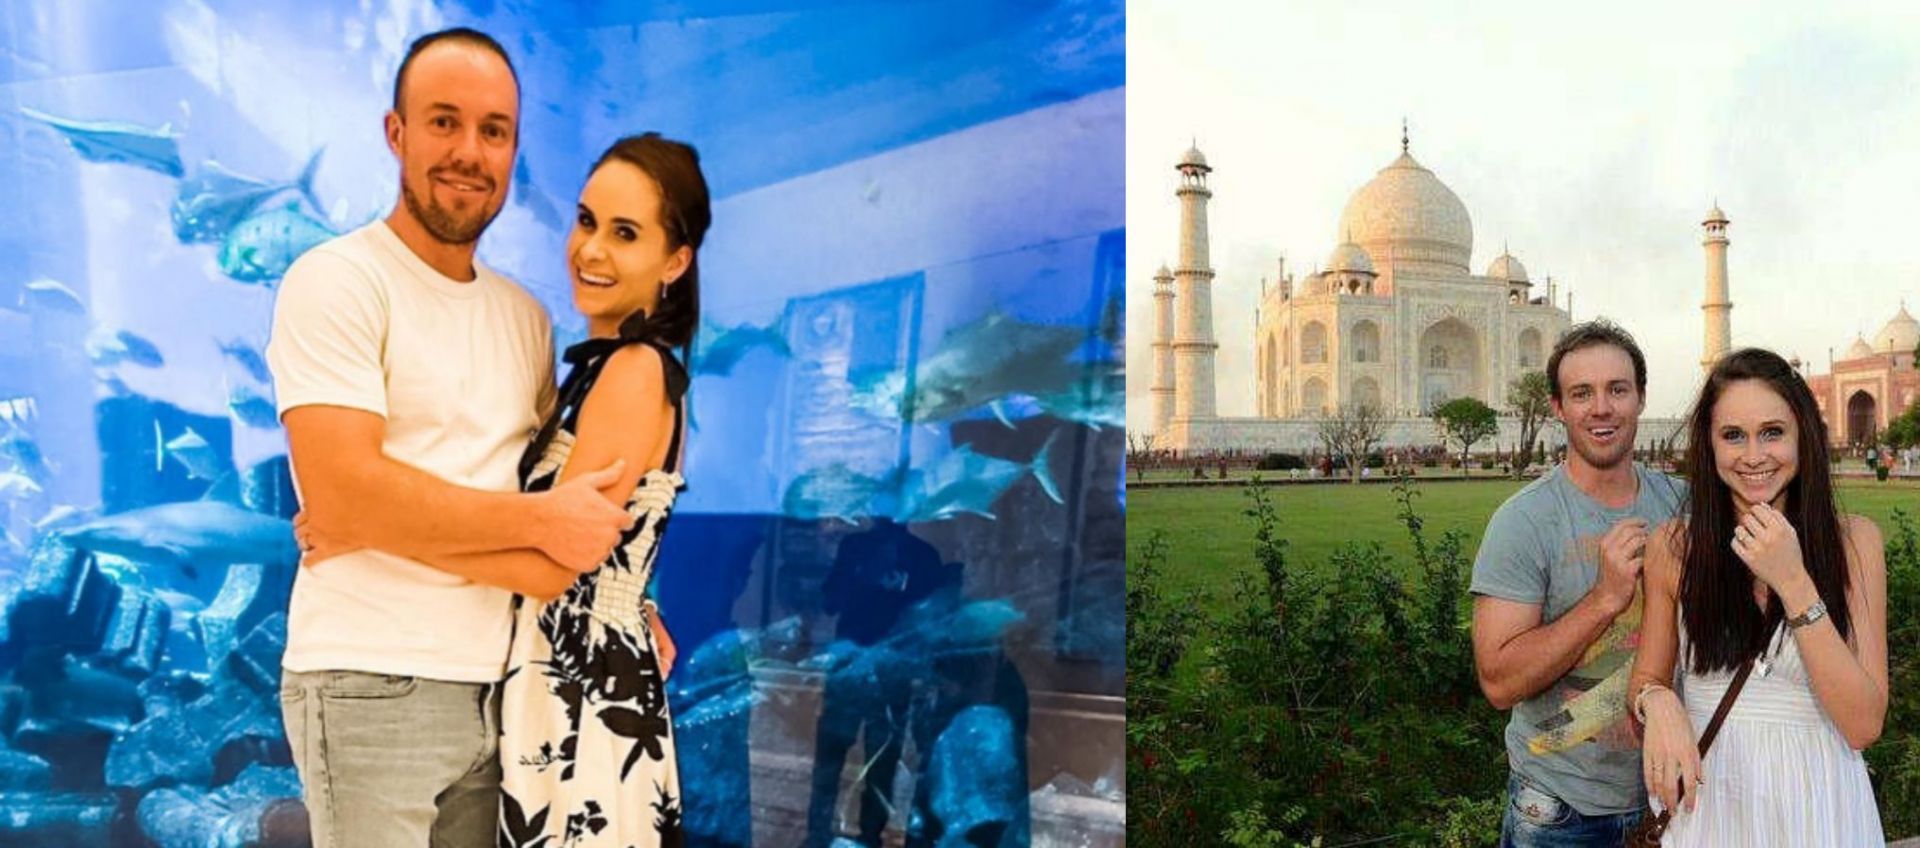 AB de Villiers proposed to his wife at the Taj Mahal.